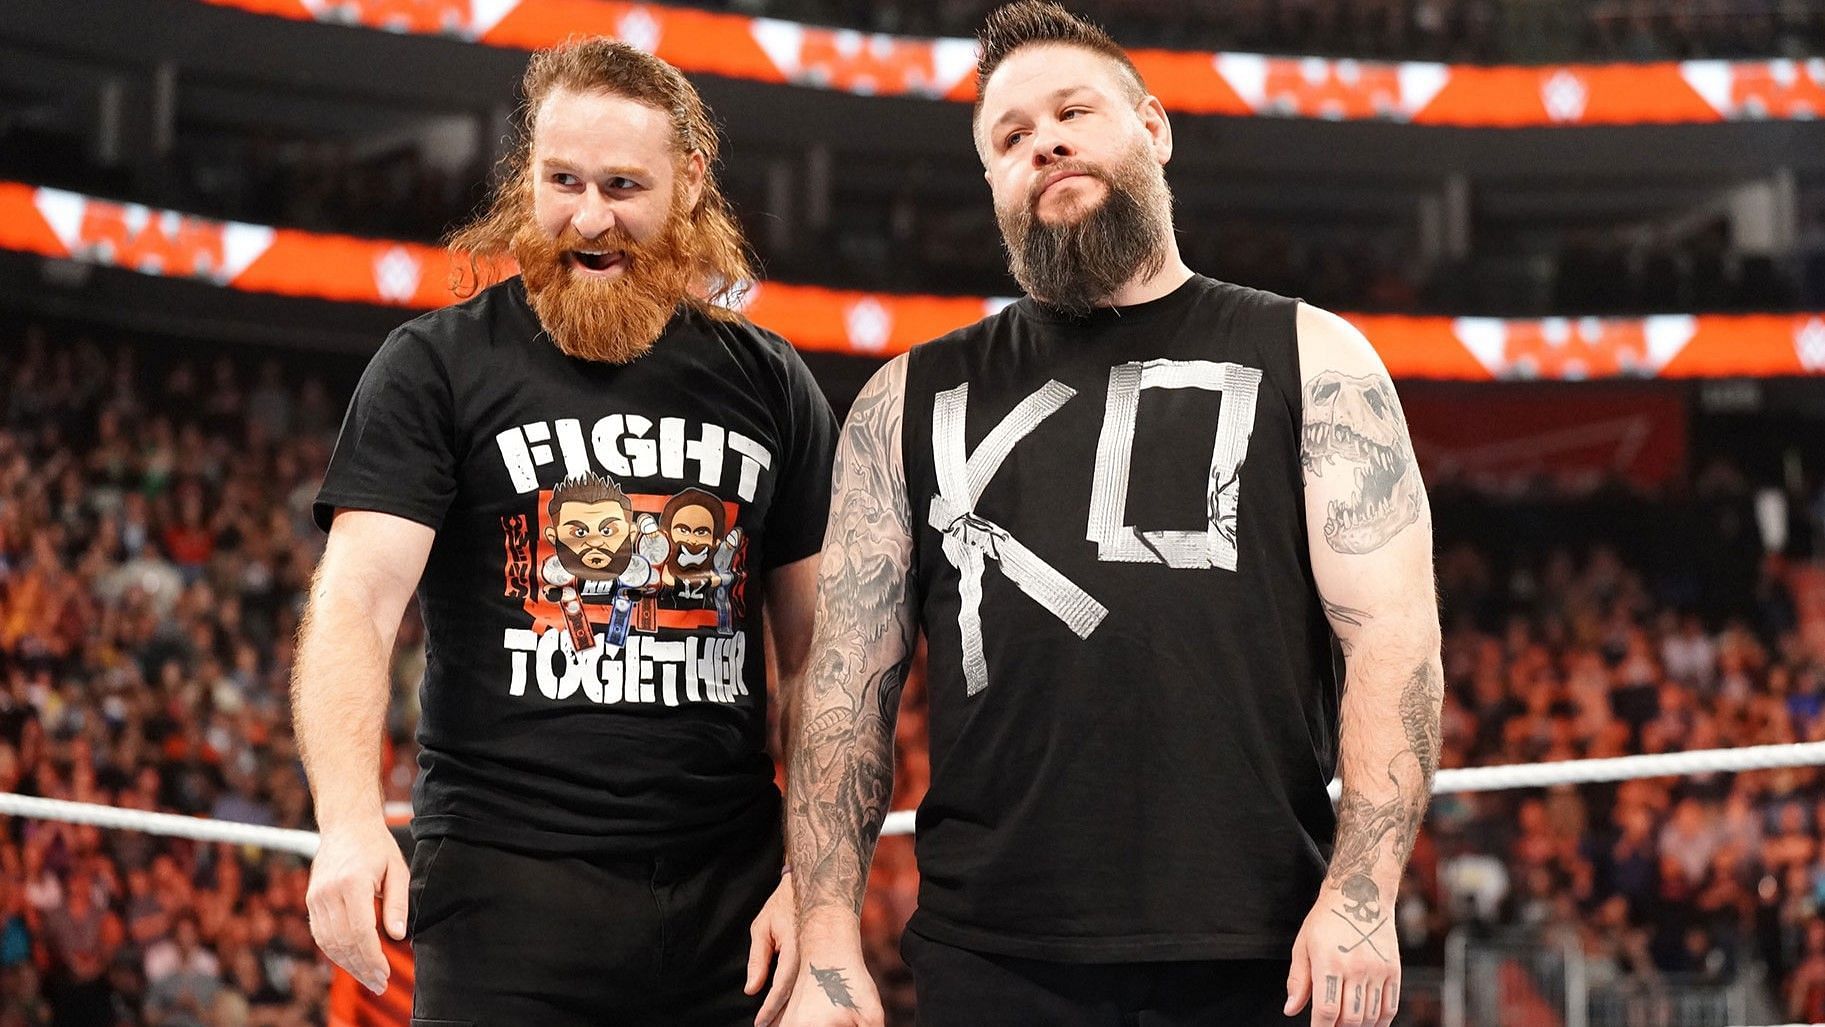 Sami Zayn and Kevin Owens will compete in a title match on RAW next week